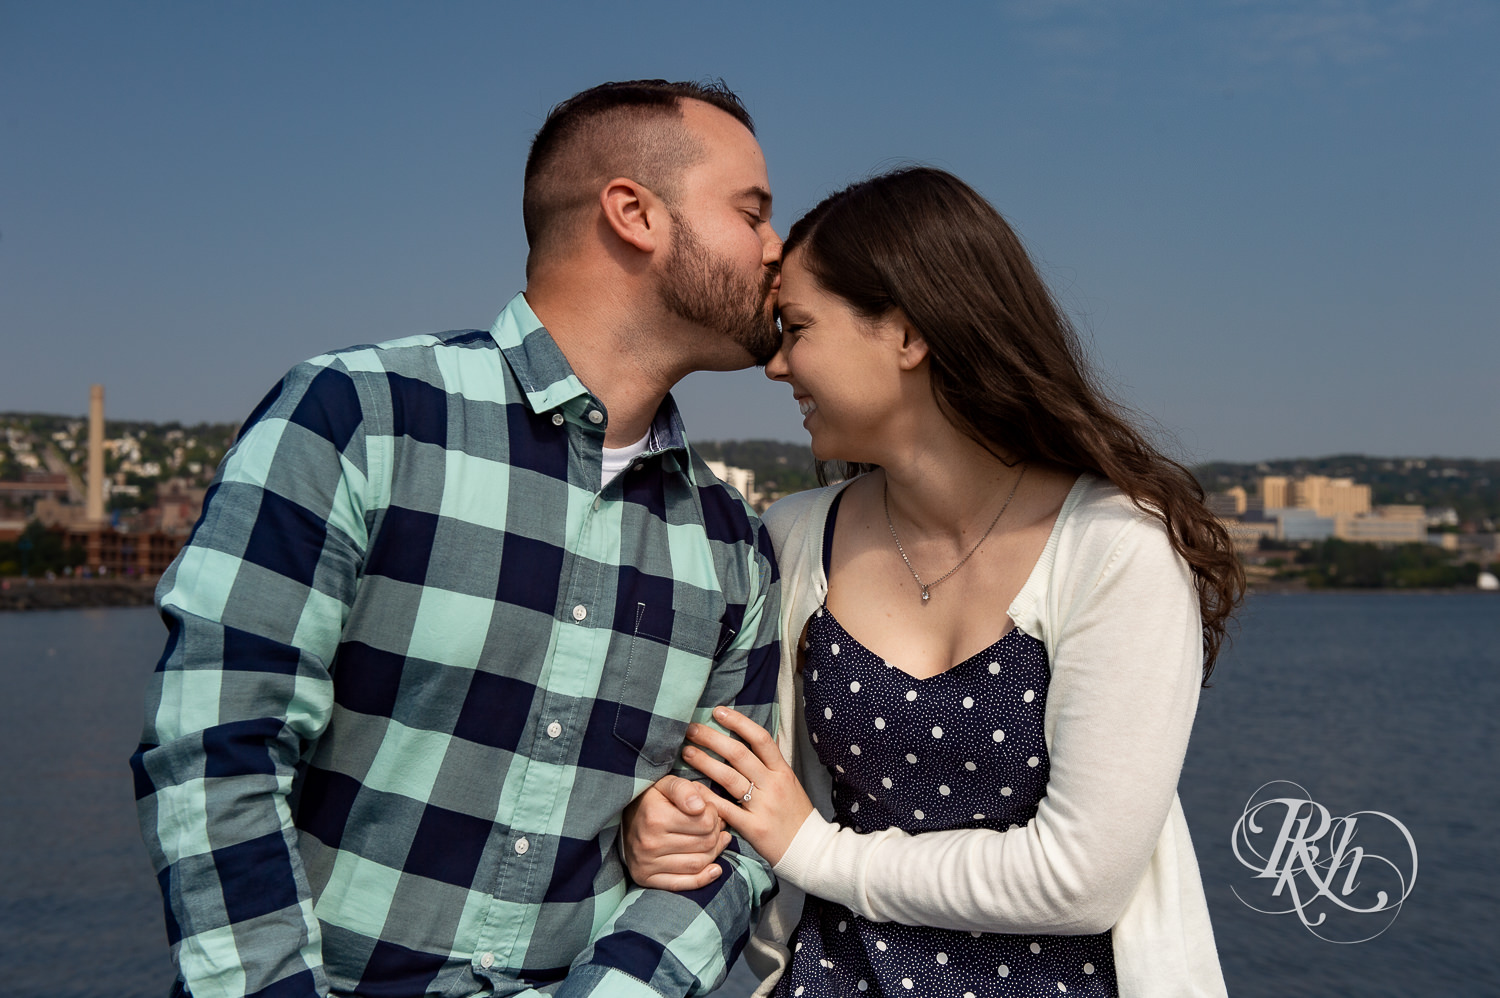 Man and woman kiss with city in background during Canal Park engagement photos in Duluth, Minnesota.